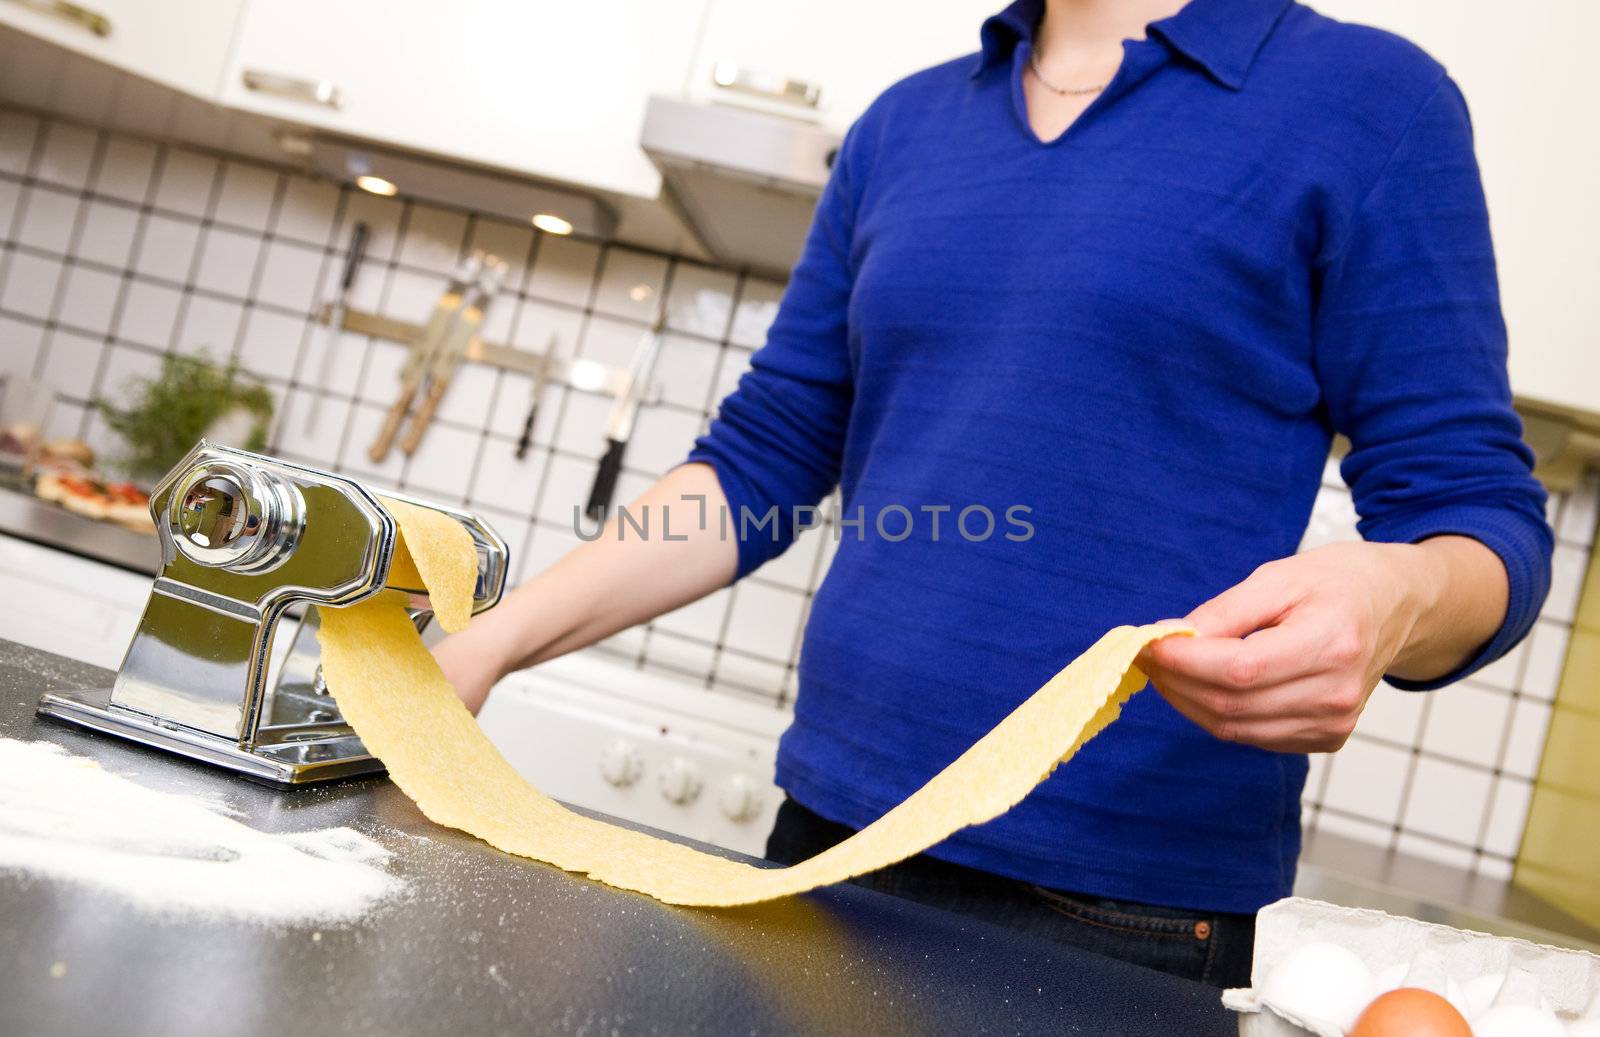 A young female stretching out pasta over the counter from a manual pasta machine at home in the kitchen.